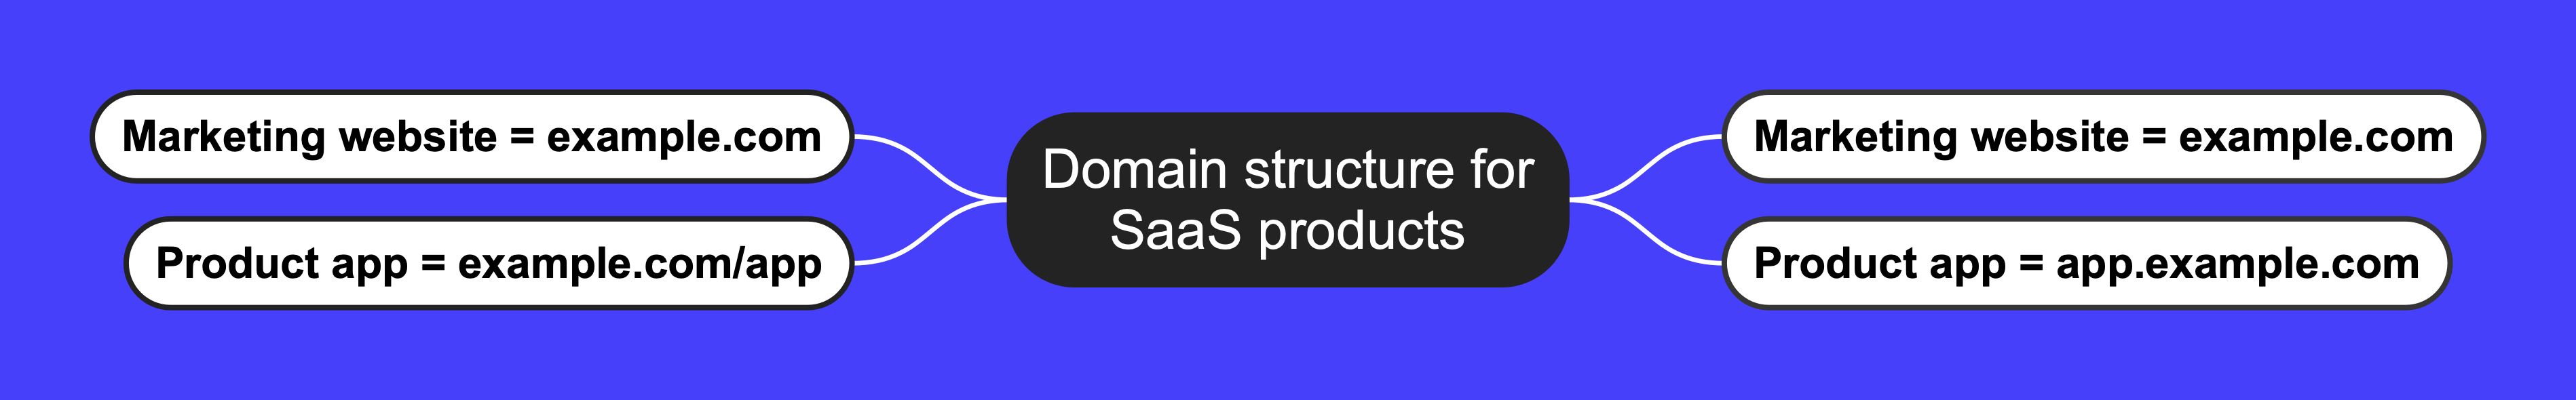 Domain structure for SaaS Products